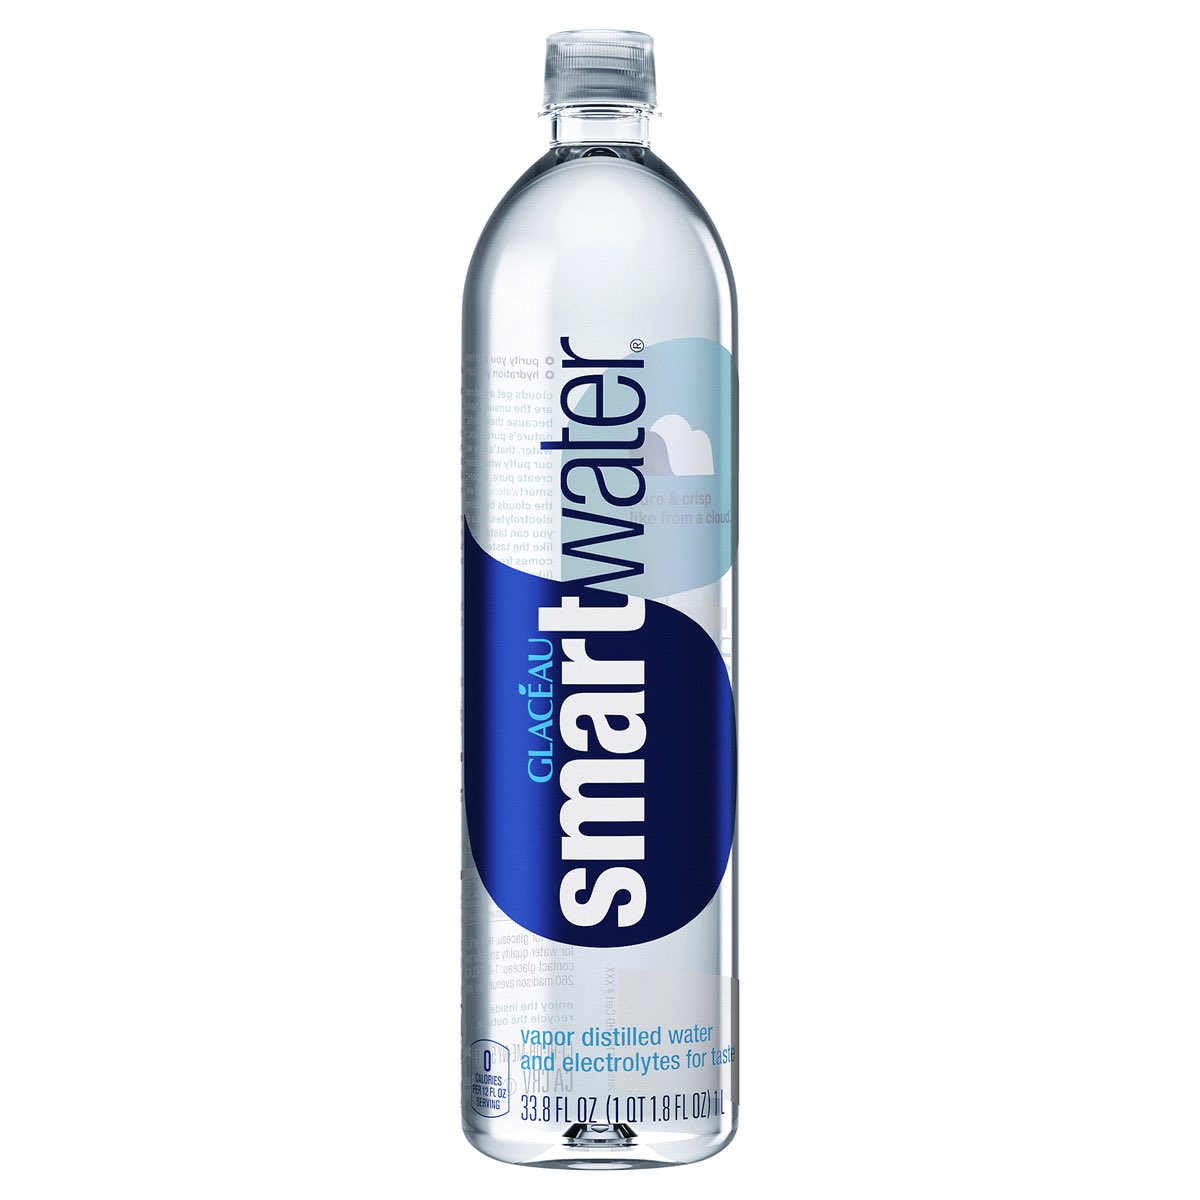 3. fiasp — smart water the same product as above but BETTER because of SCIENCE (?) & MARKETING !!!!!!